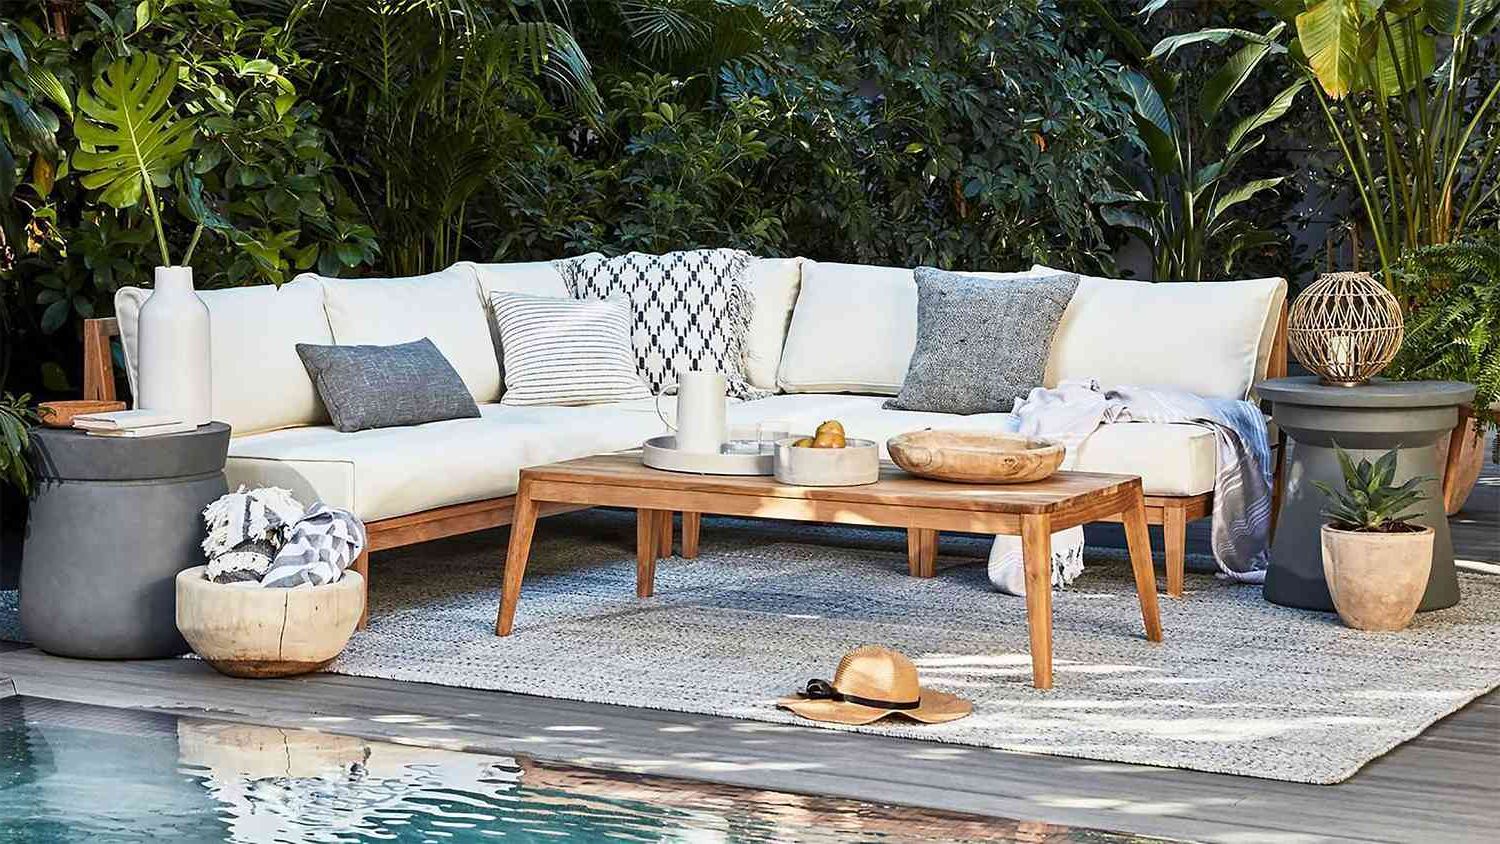 Preferred Outer's Outdoor Sectional Is More Comfortable Than My Indoor Couch For Outdoor Couch Cushions, Throw Pillows And Slat Coffee Table (Photo 2 of 15)